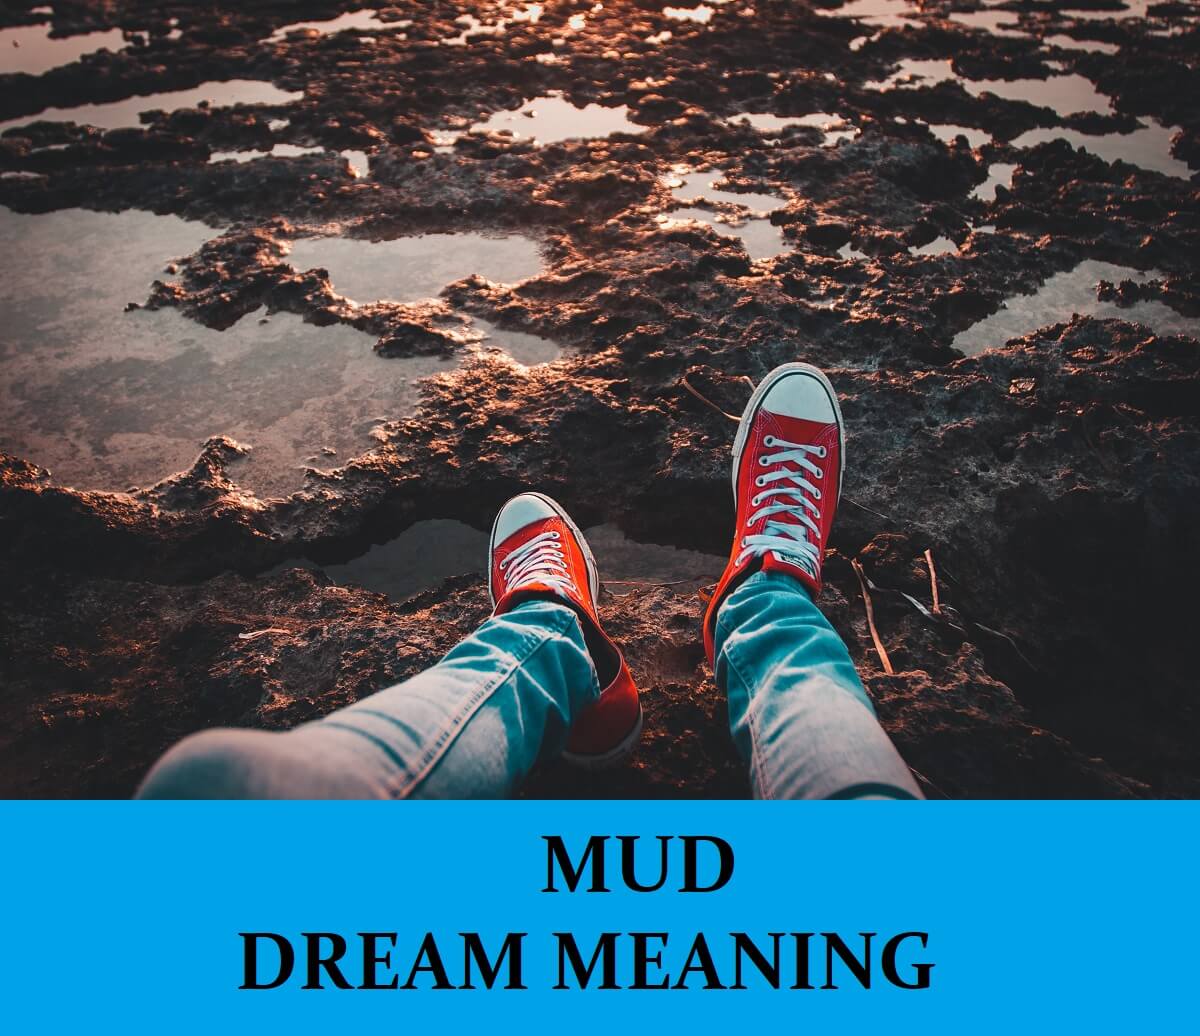 Muddy meaning